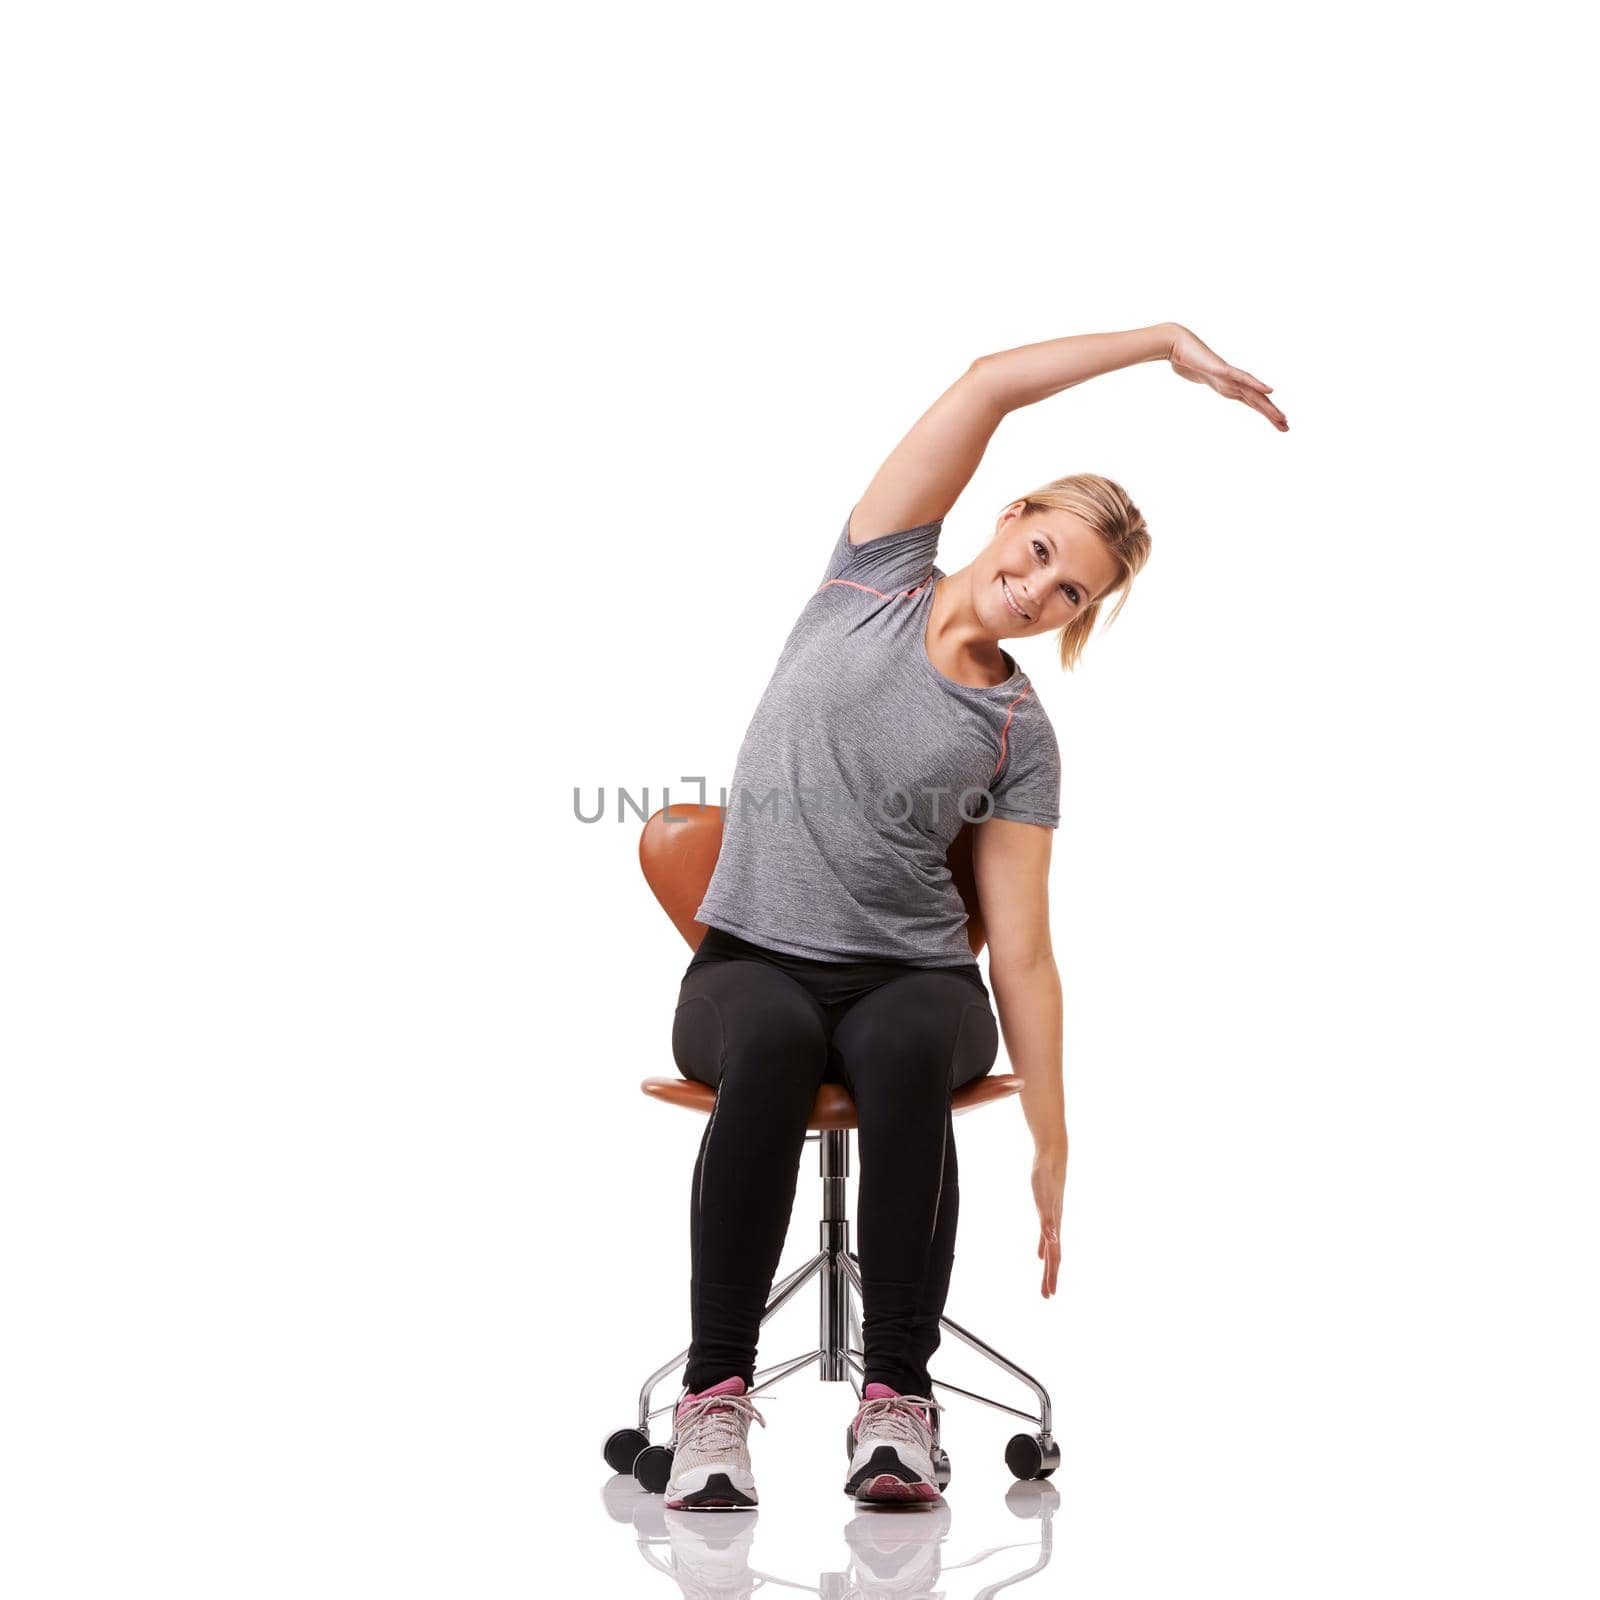 Perfect for your posture. a sporty woman doing stretches on a chair